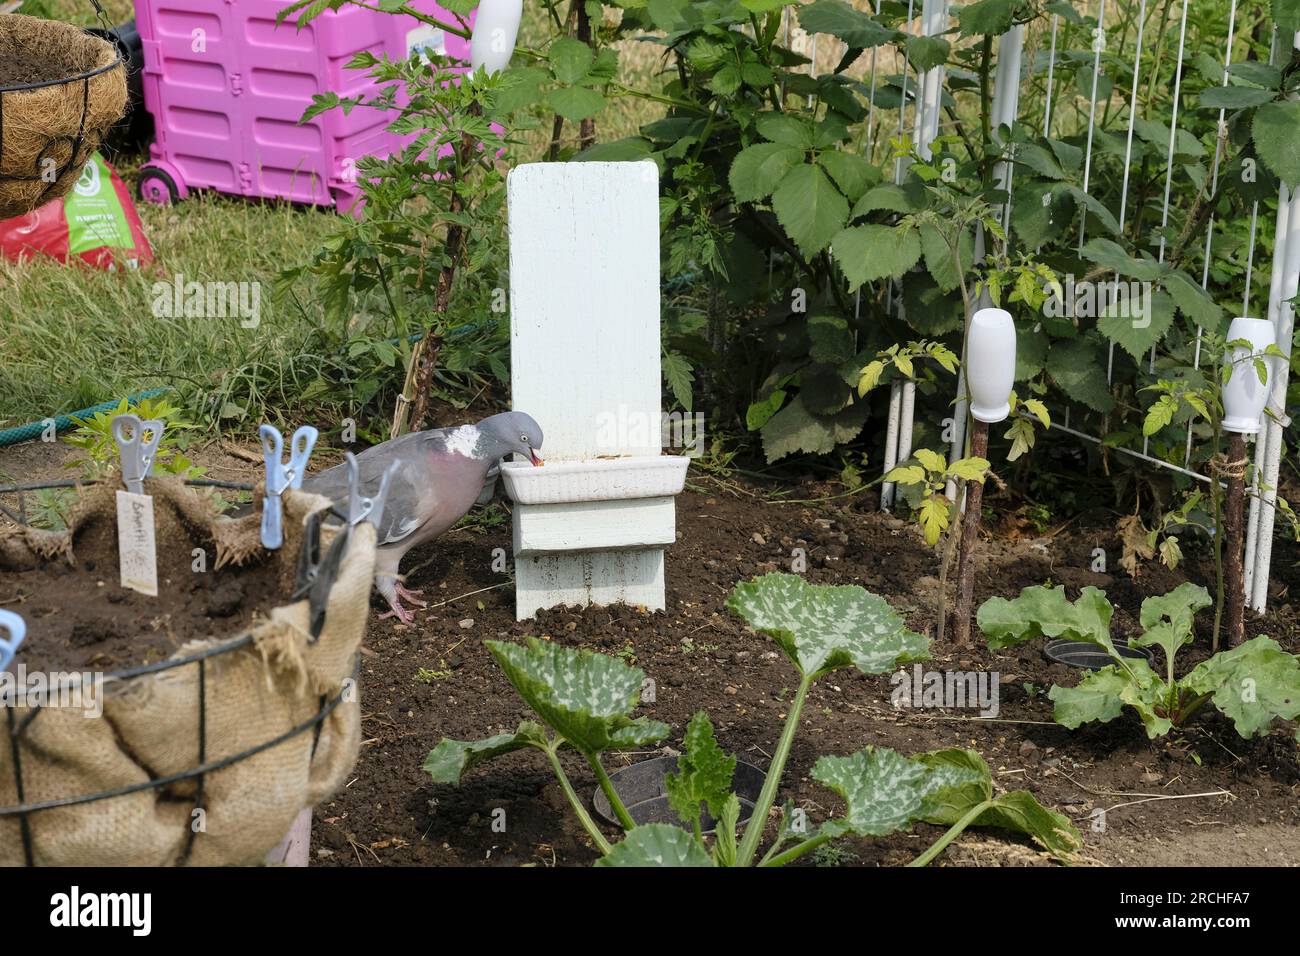 Common Wood Pigeon (Columba palumbus) pecking at mealworms in home made low level bird feeder Stock Photo